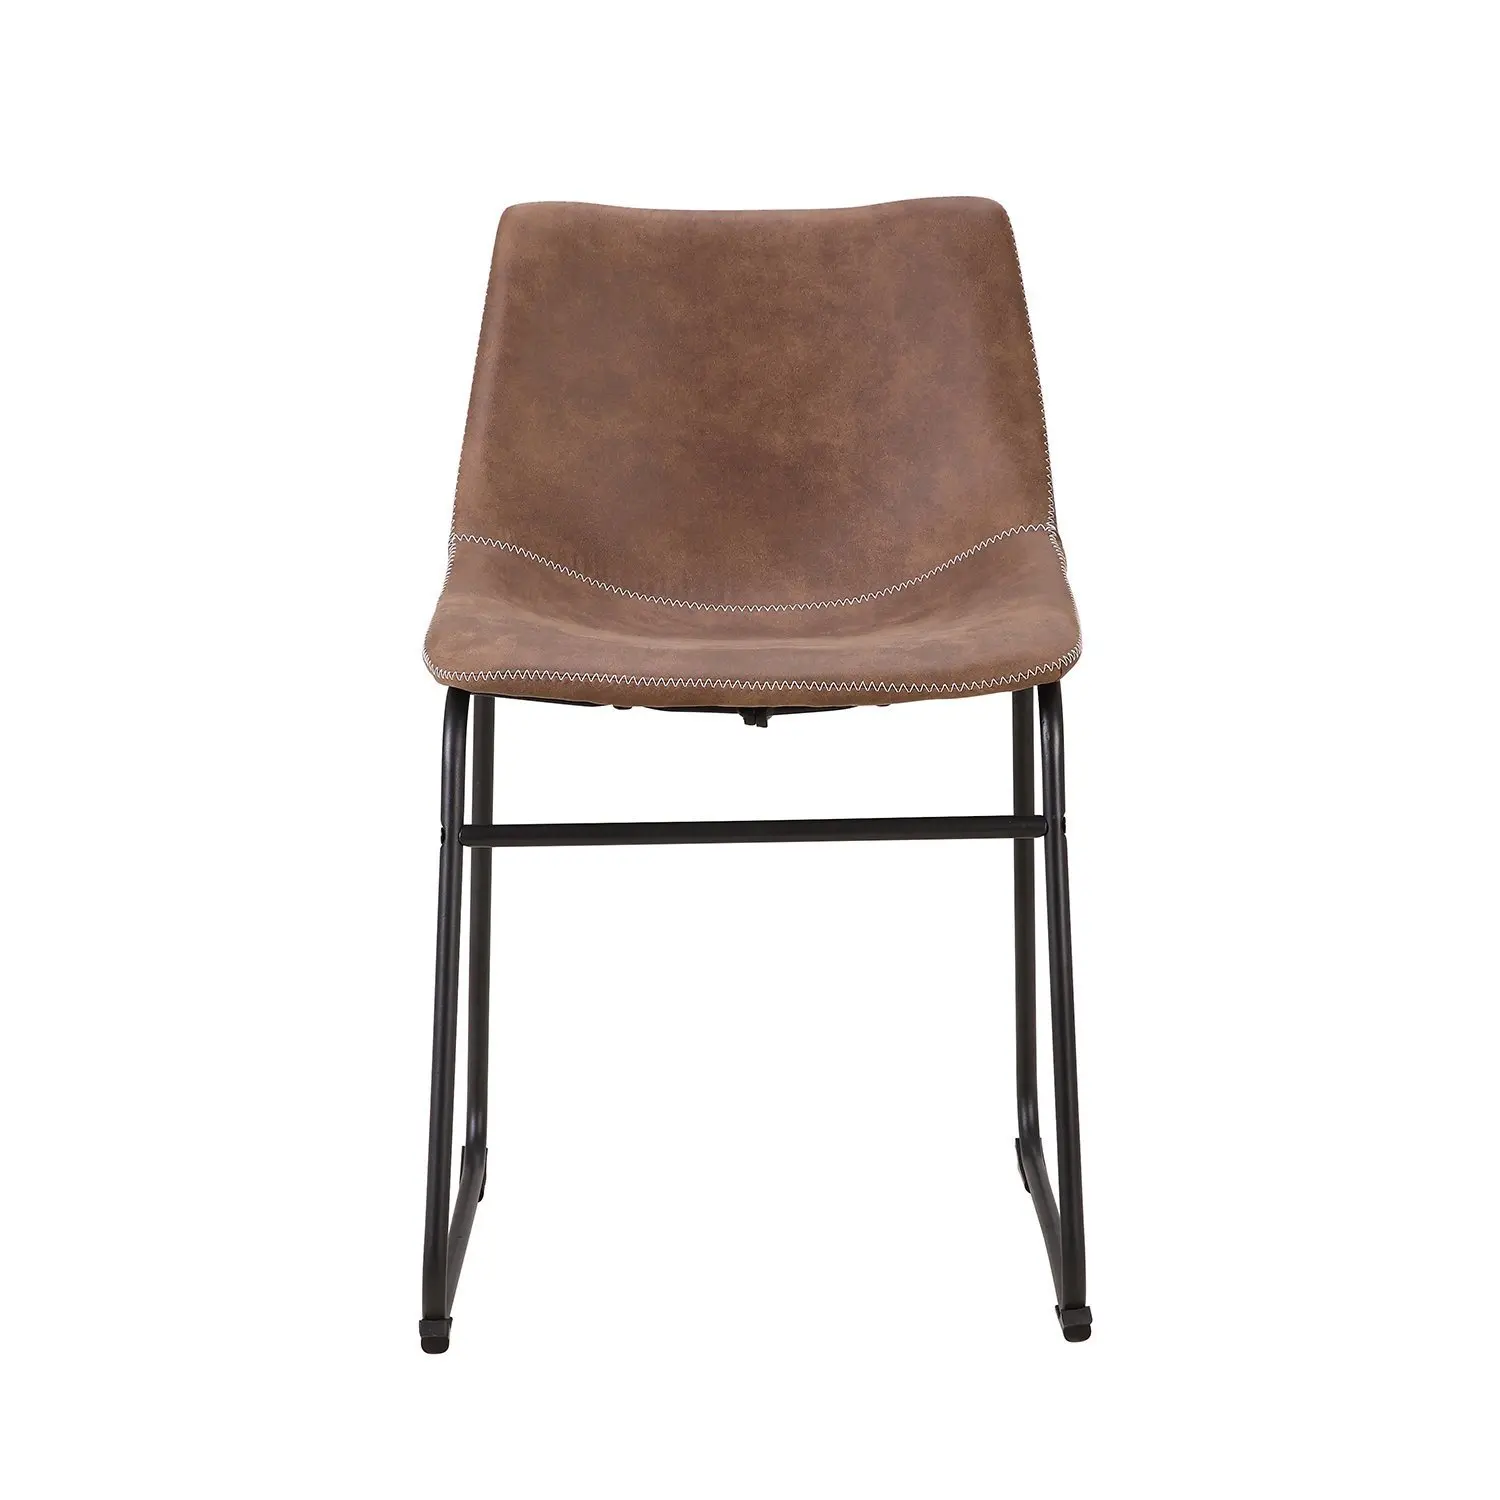 Vintage Faux Leather Dining Chair Industrial retro modern Chair for Dining Living Waiting Room